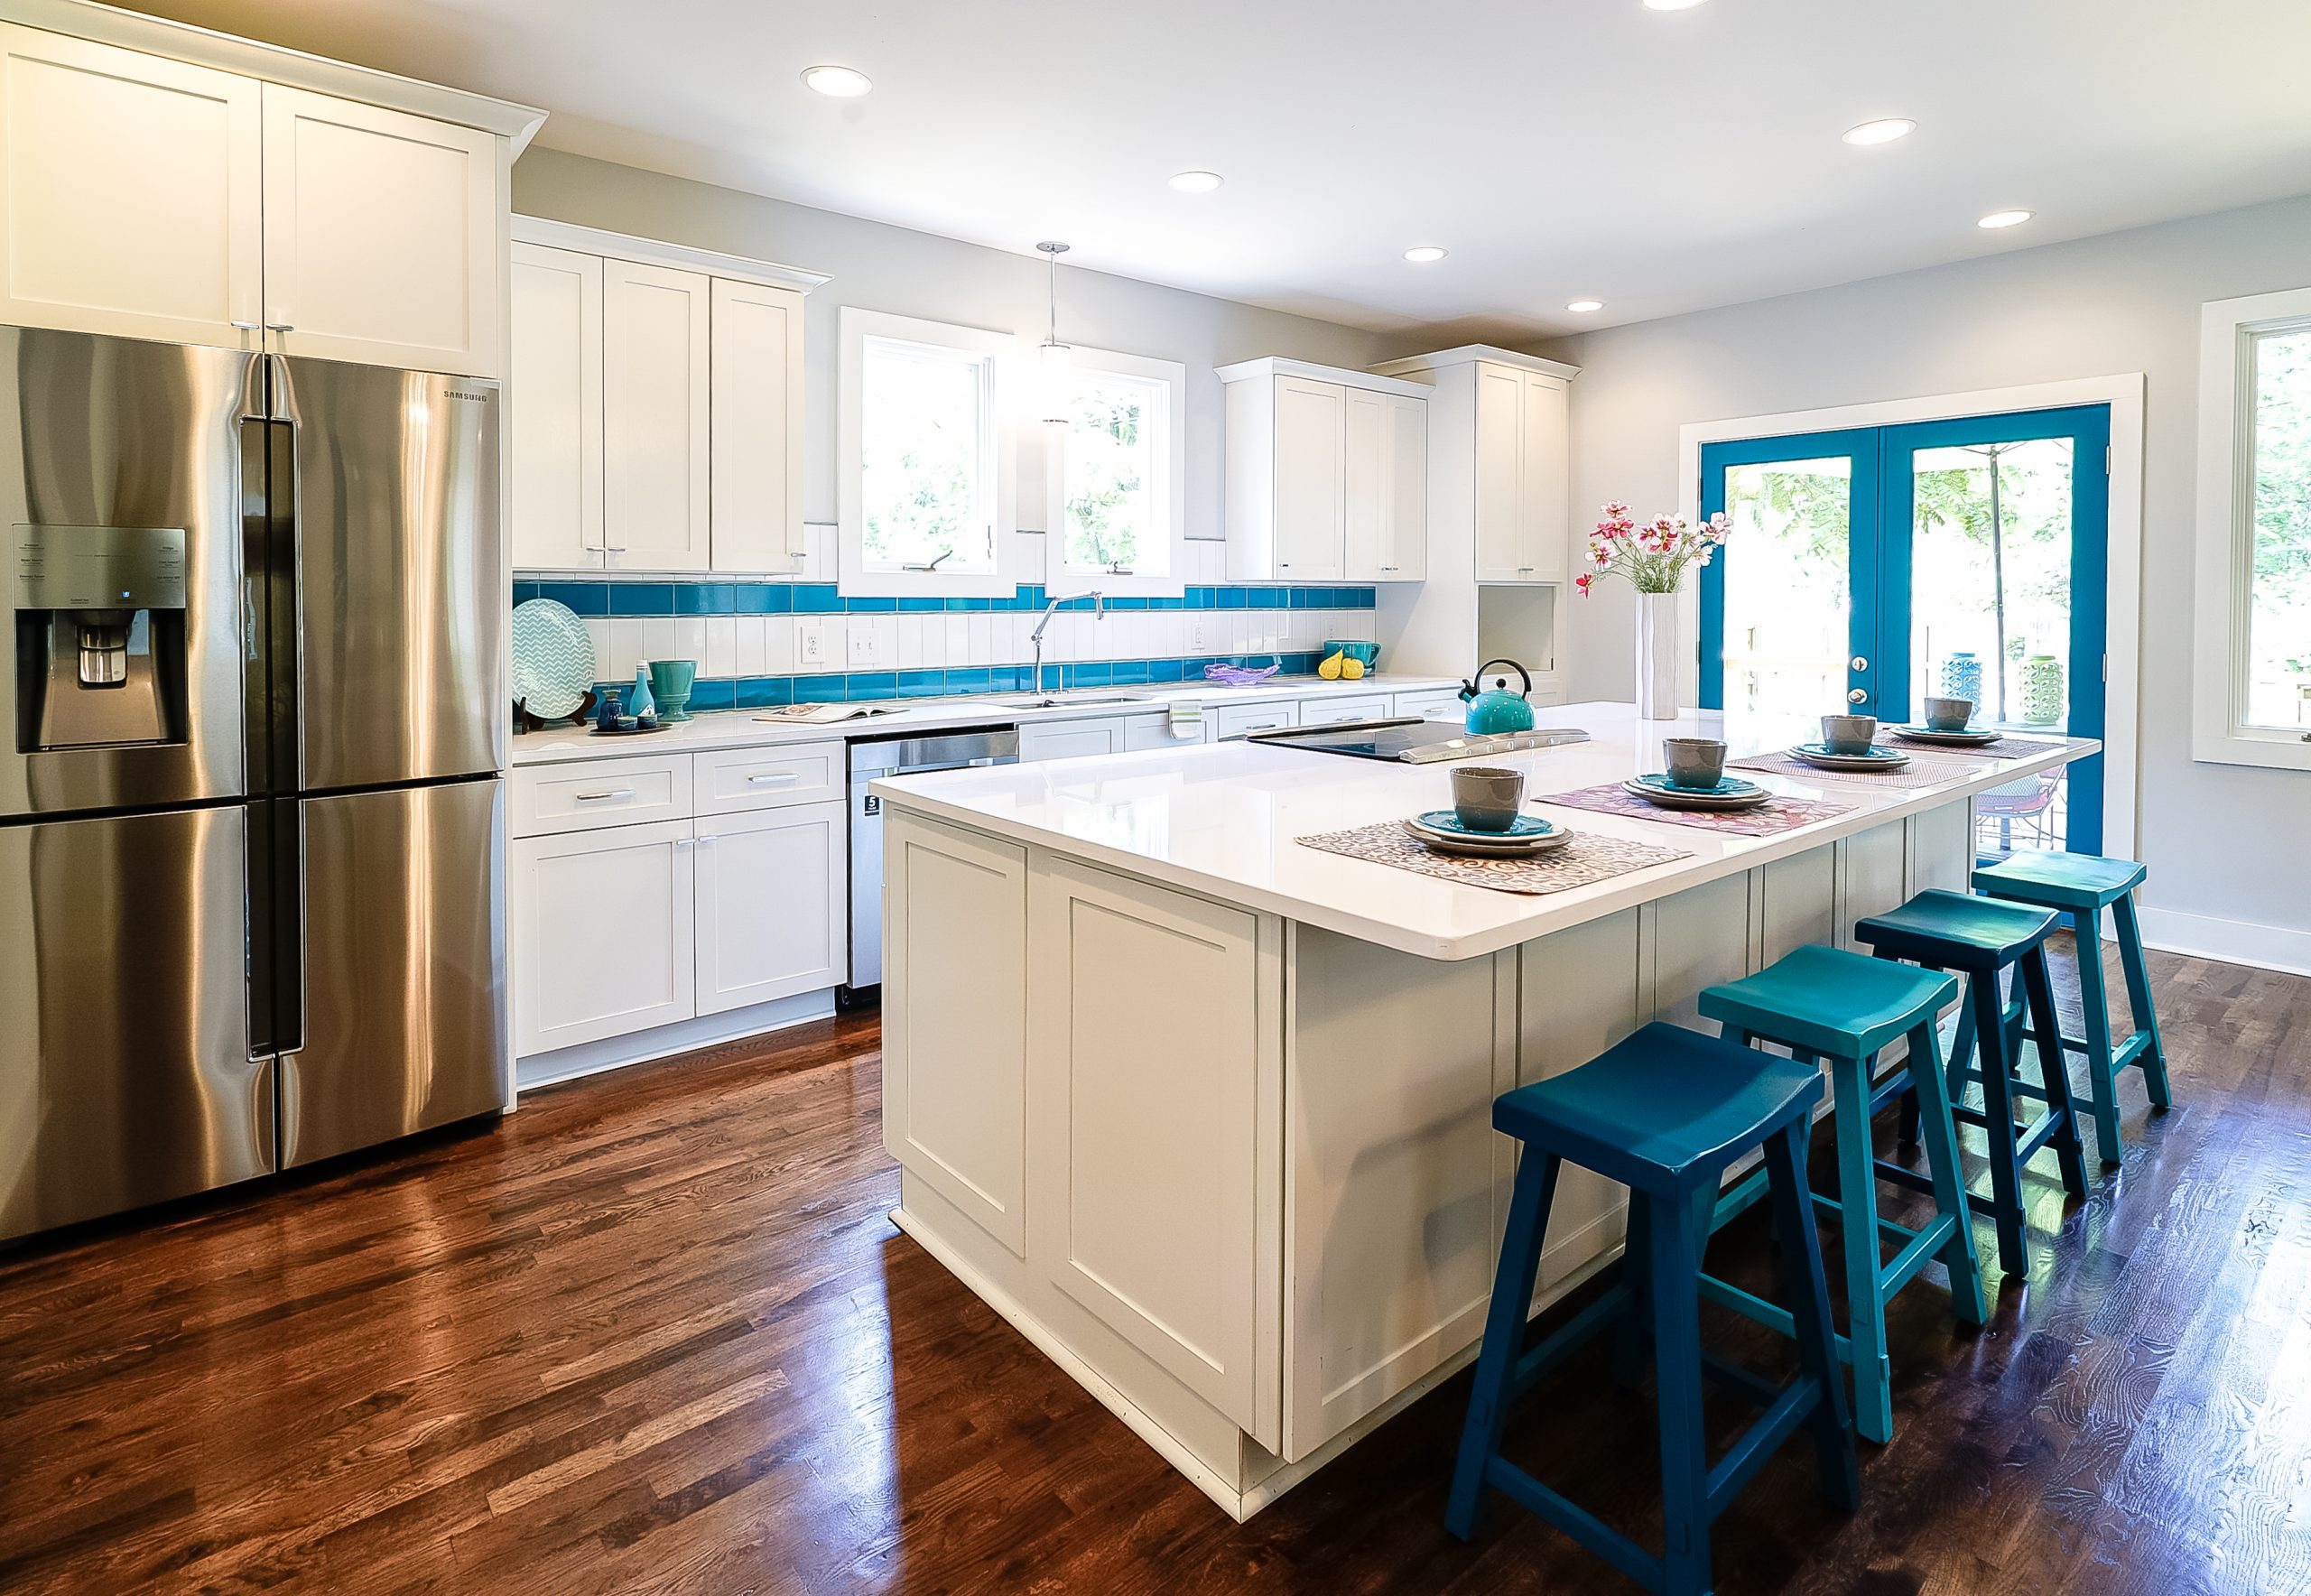 Bright white kitchen with hits of electric blue